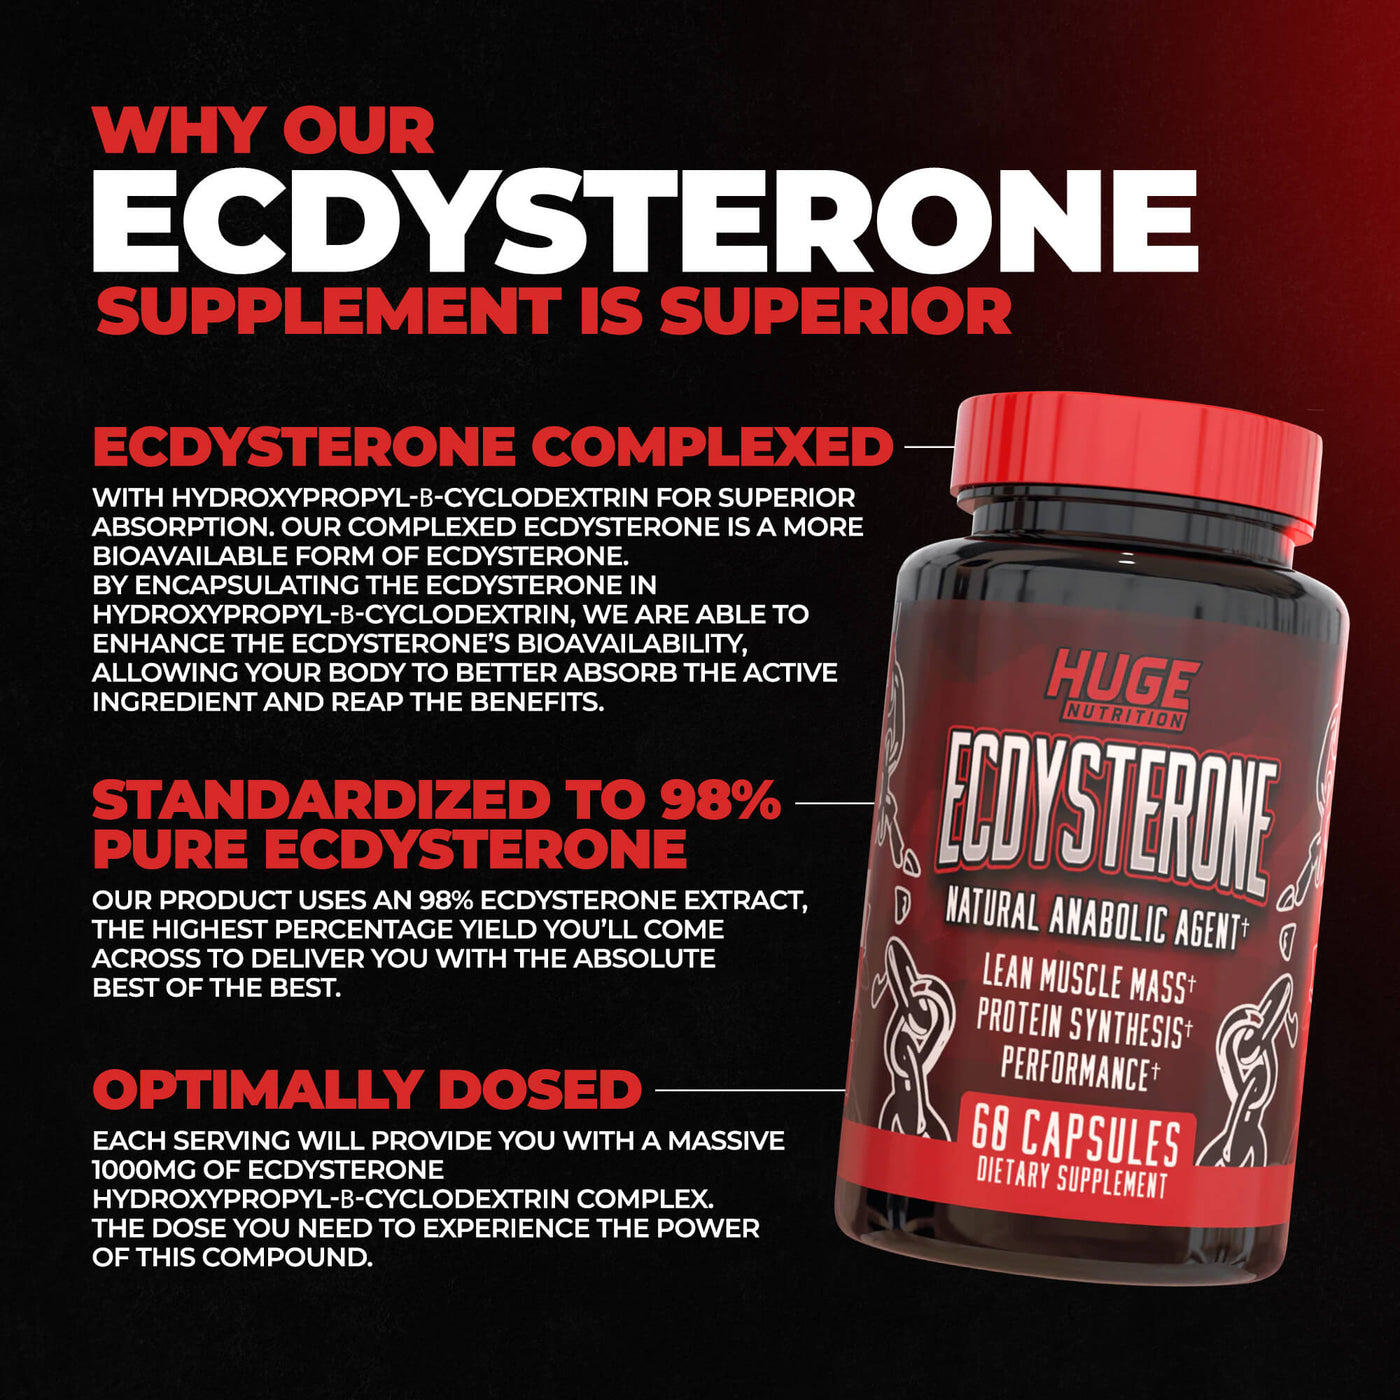 why our ecdysterone supplement is superior